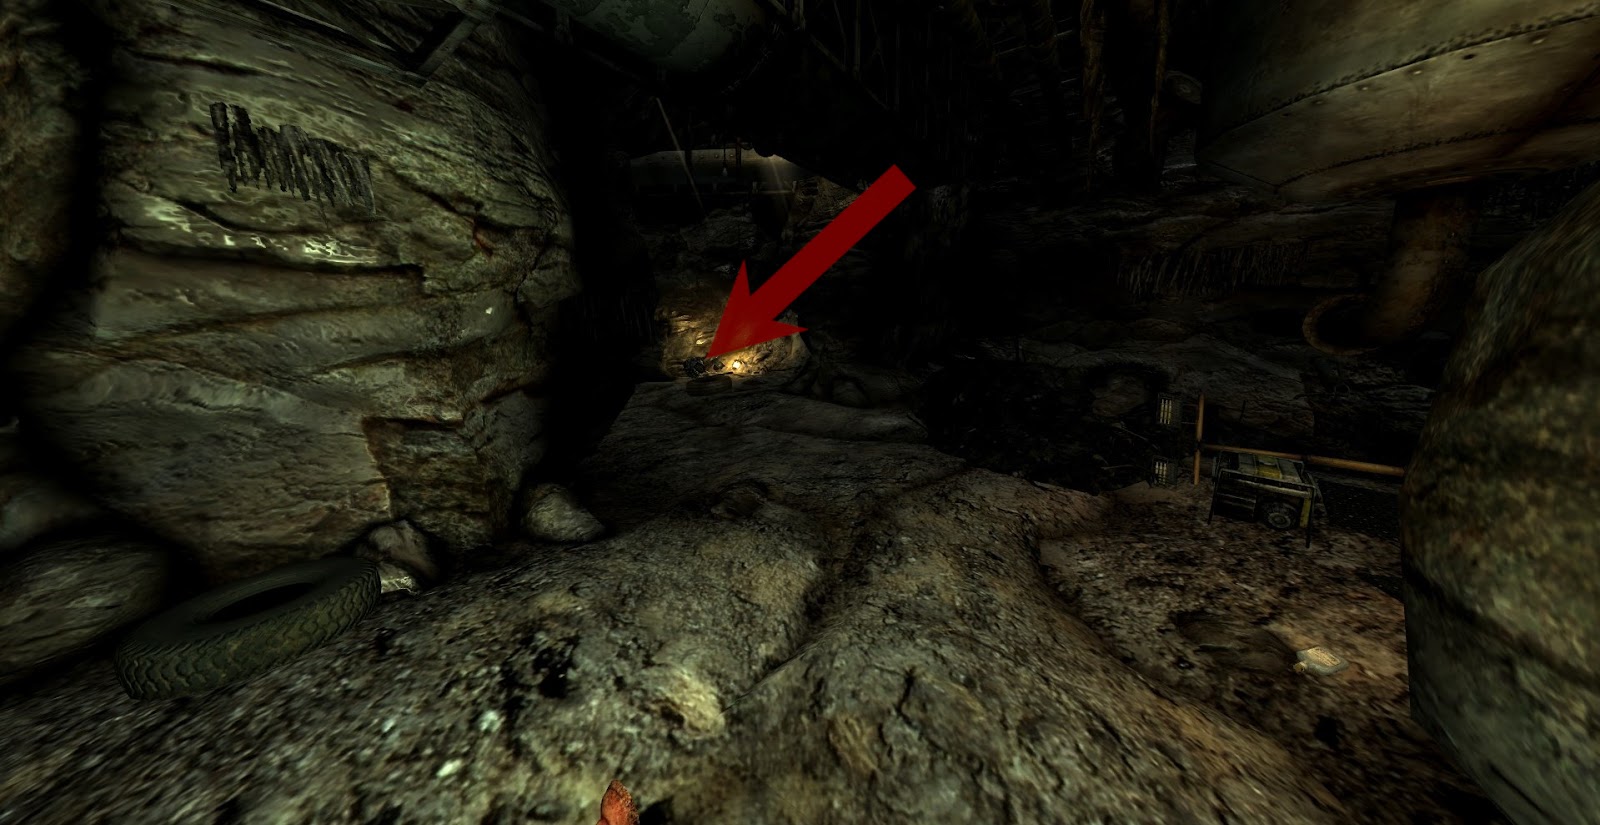 Destroyed Eyebot inside the cave. | Fallout: New Vegas